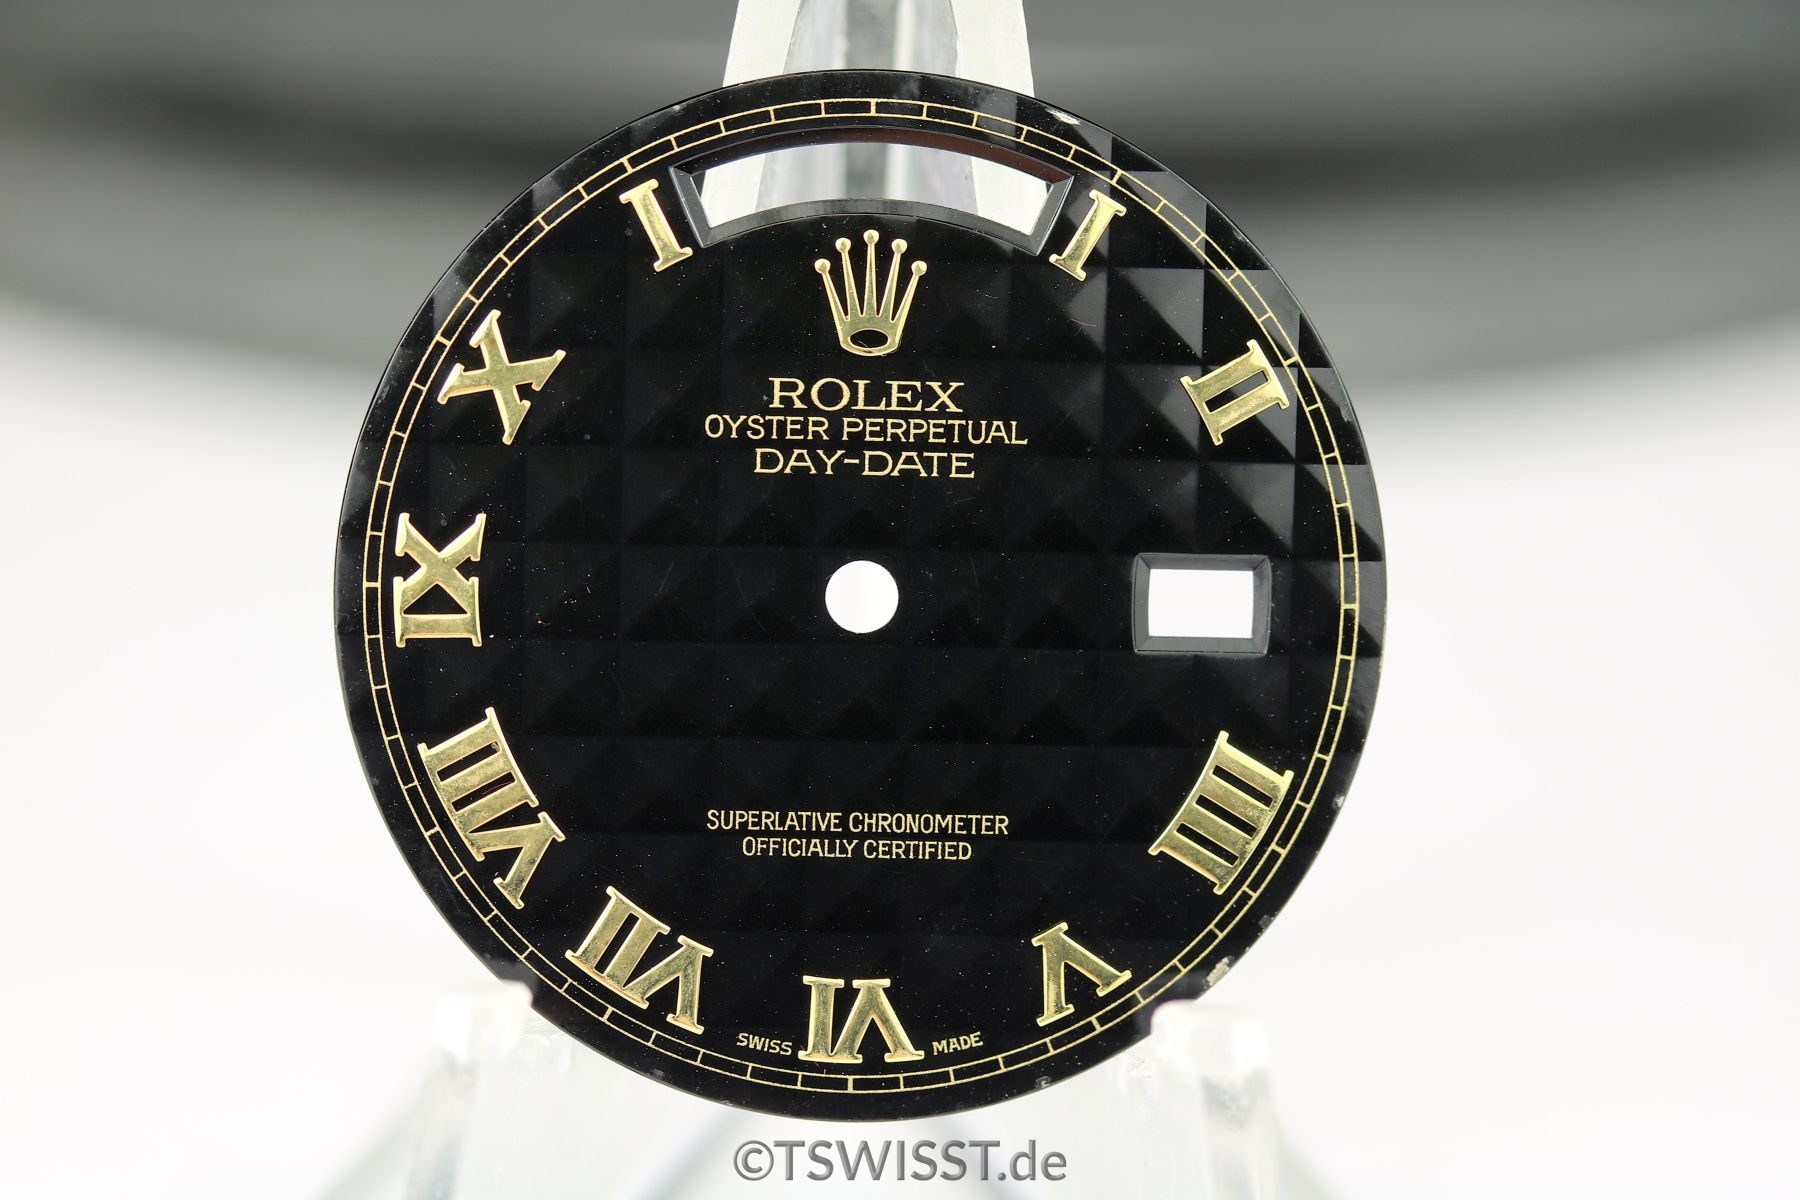 Rolex Day-Date honeycomb dial